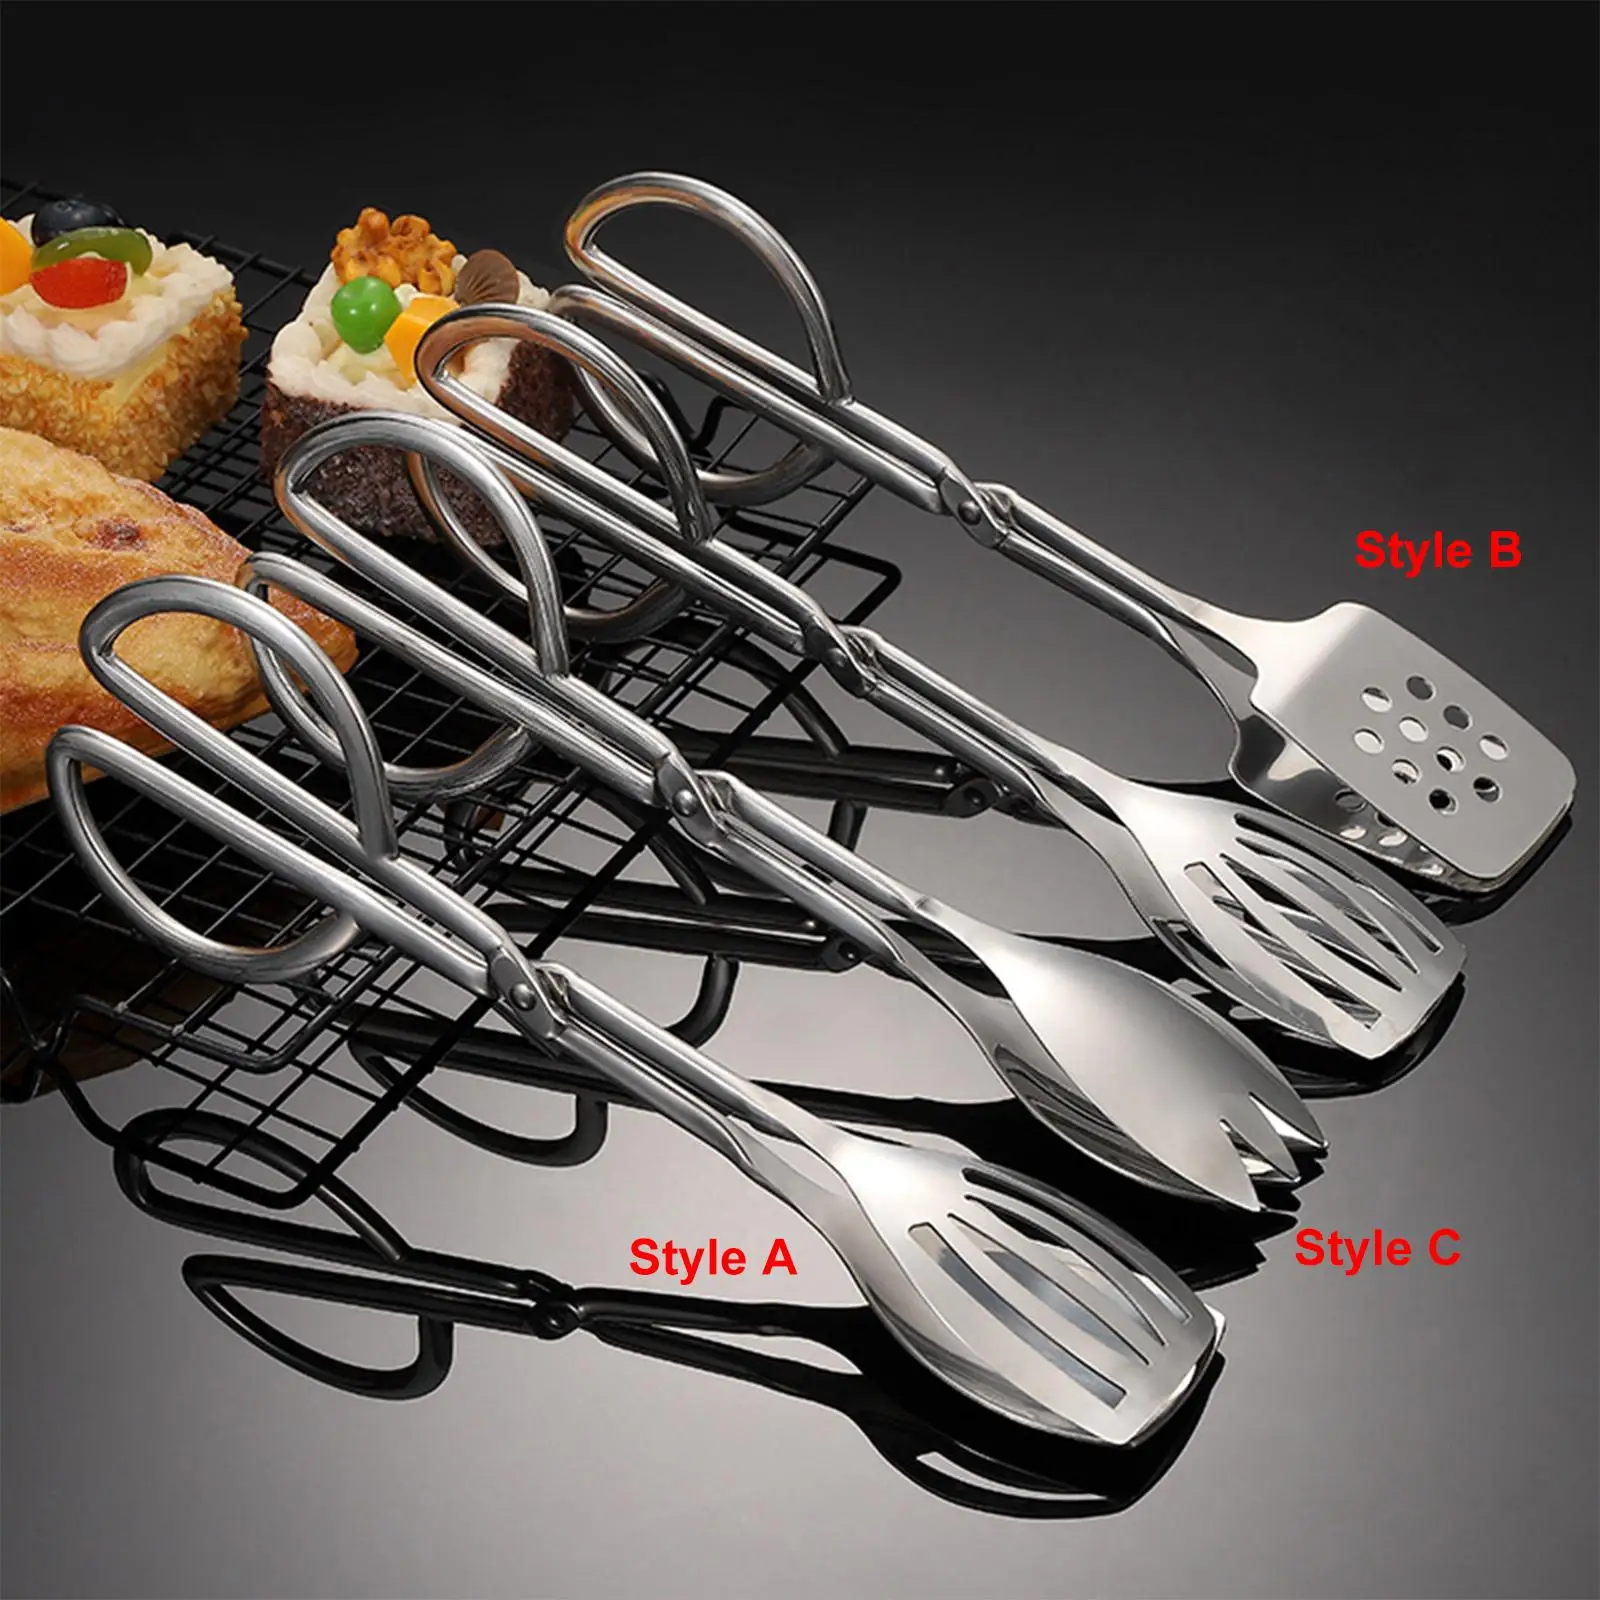 Stainless Steel Cake Clamp Tongs Kitchen Utensil Food Serving Tongs Gripper Vegetable Salad BBQ Frying Buffet Bread Tongs Clip